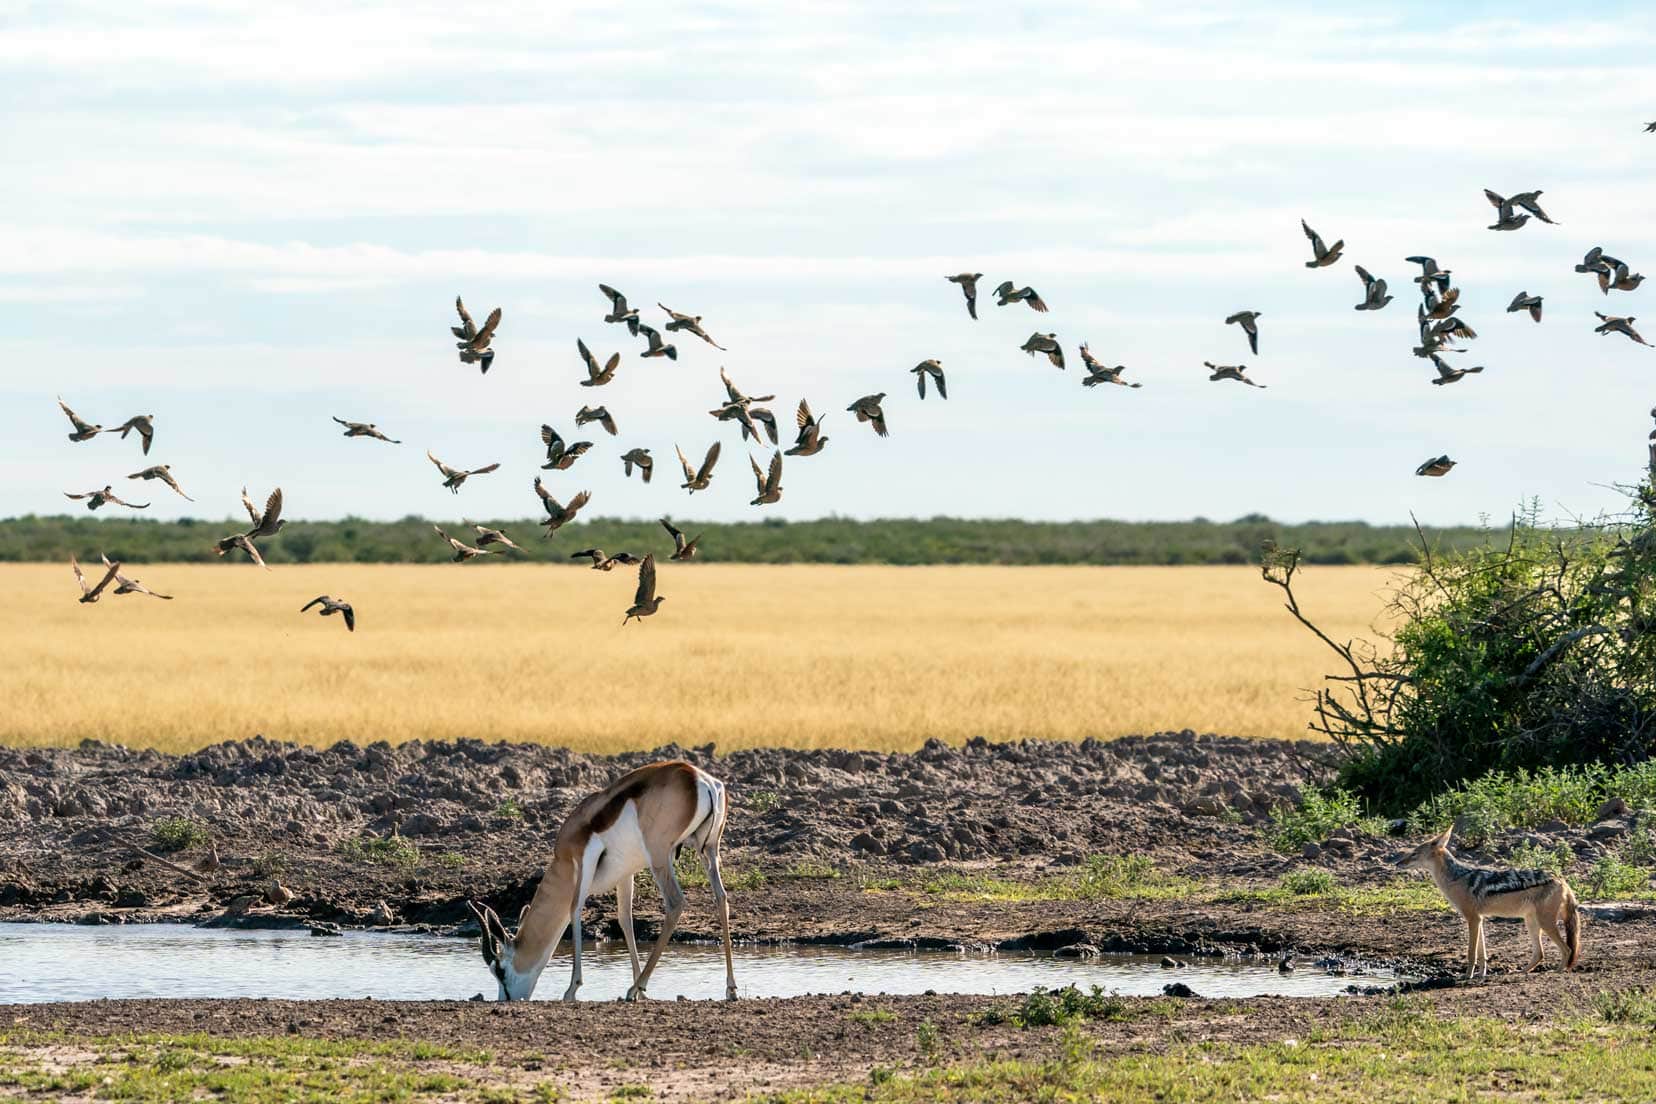 Jackal and springok at water hole with birds flying around 